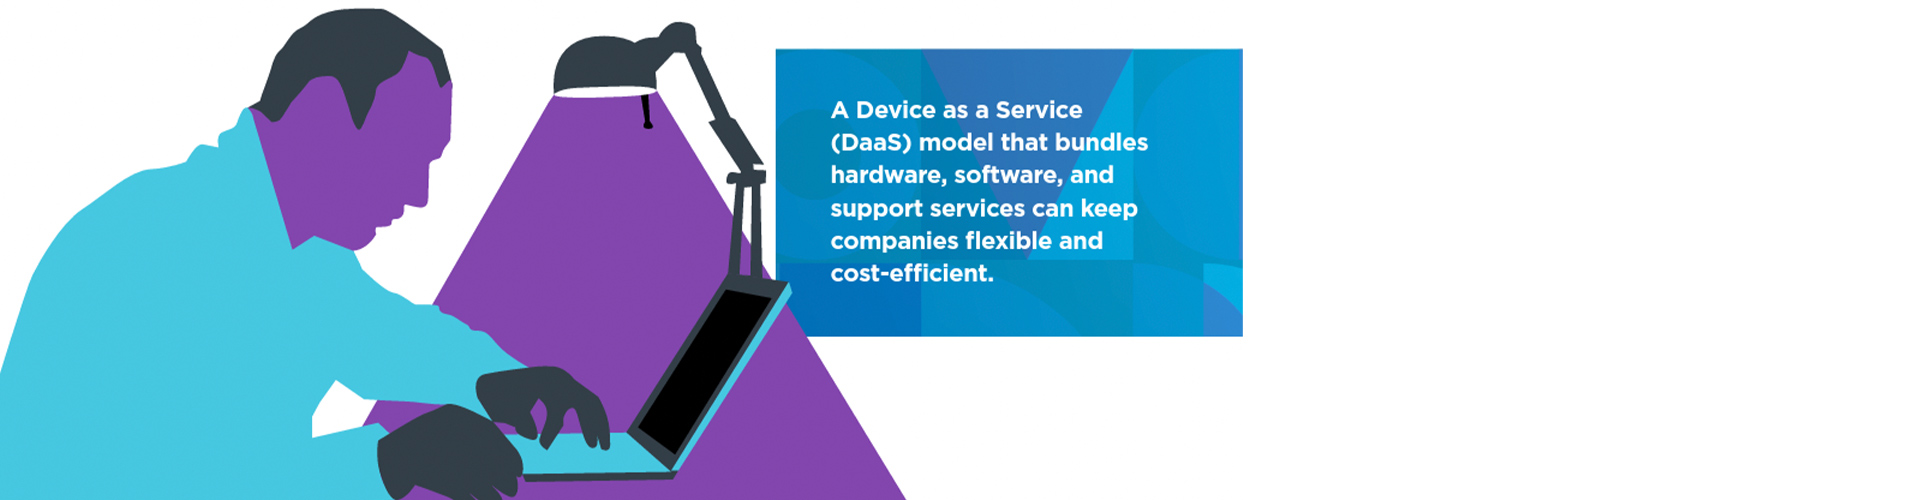 A device as a Service (DaaS) model that bundles hardware, software, and support services can keep companies flexible and cost-efficient.